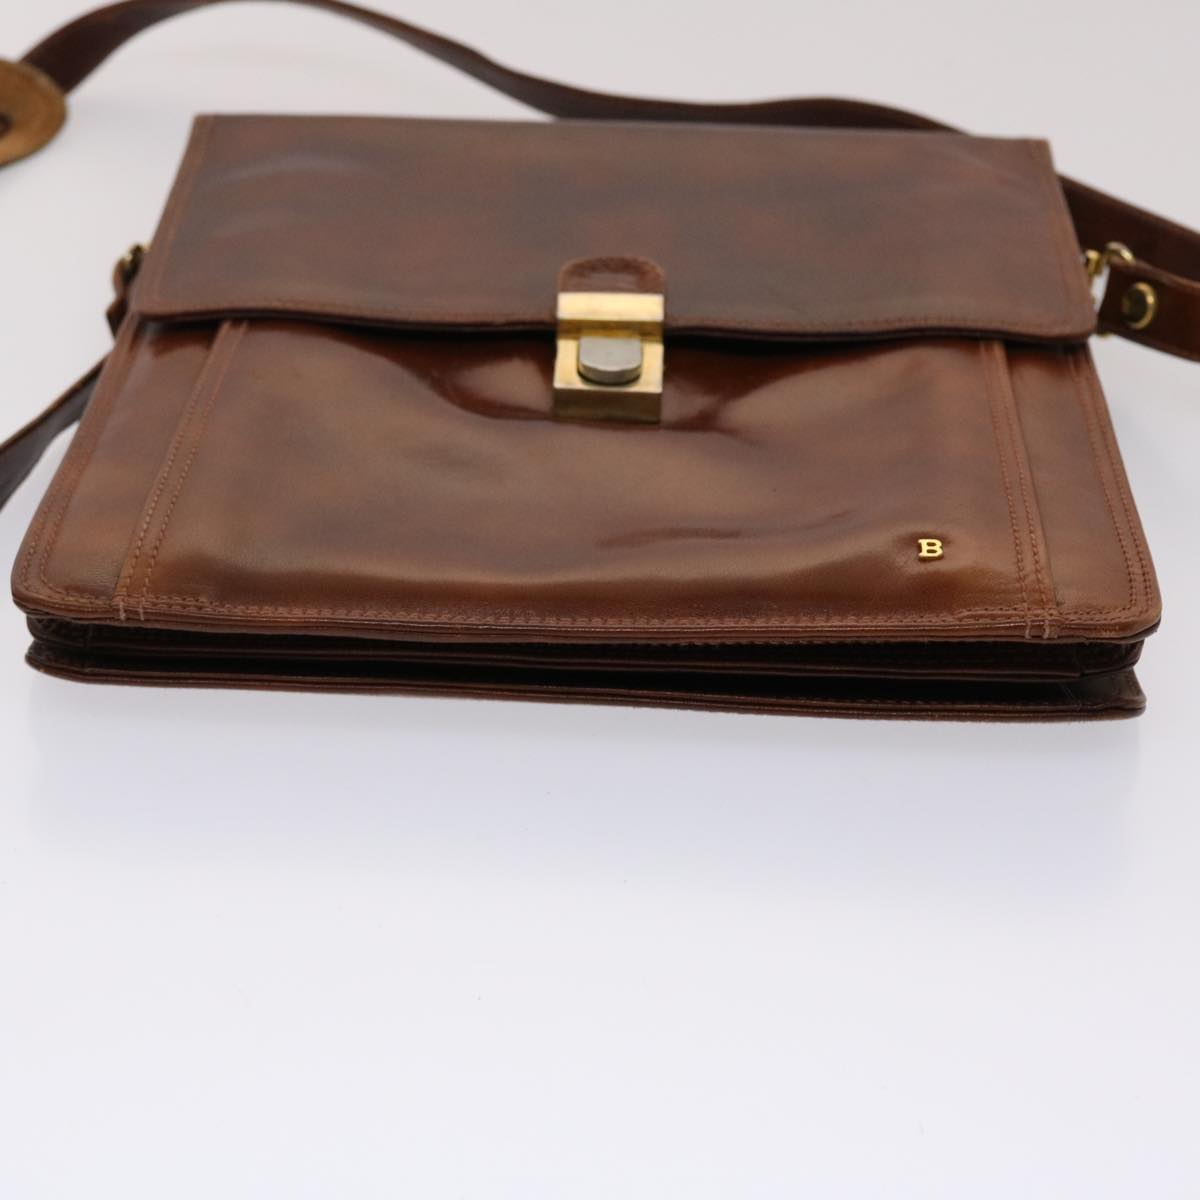 BALLY Shoulder Bag Leather 2Set Brown White Auth bs6514